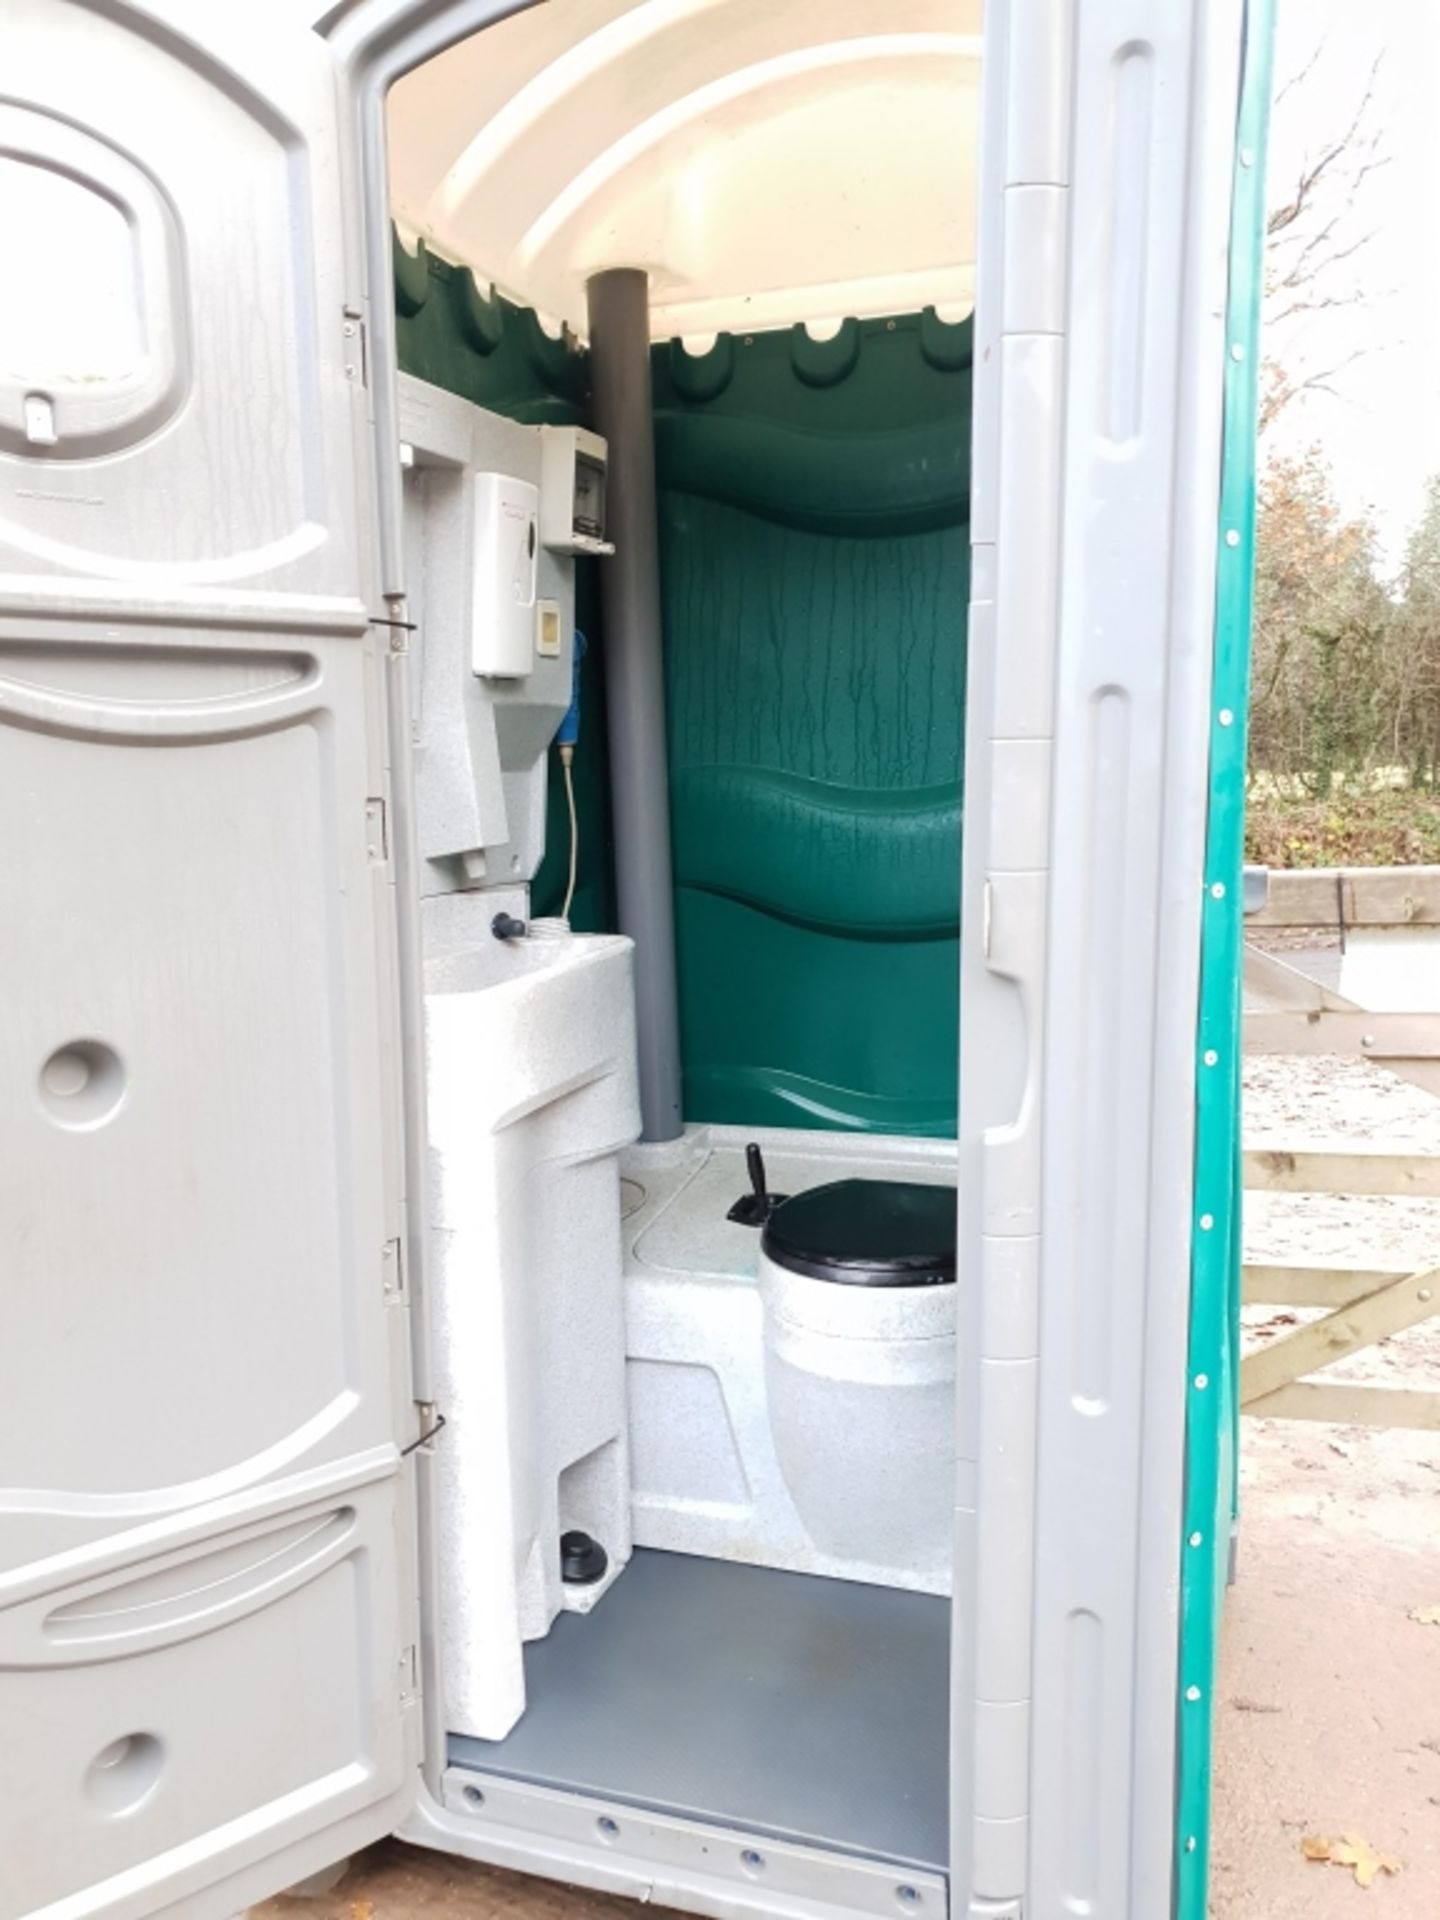 Portable Site Toilet. - Image 3 of 4